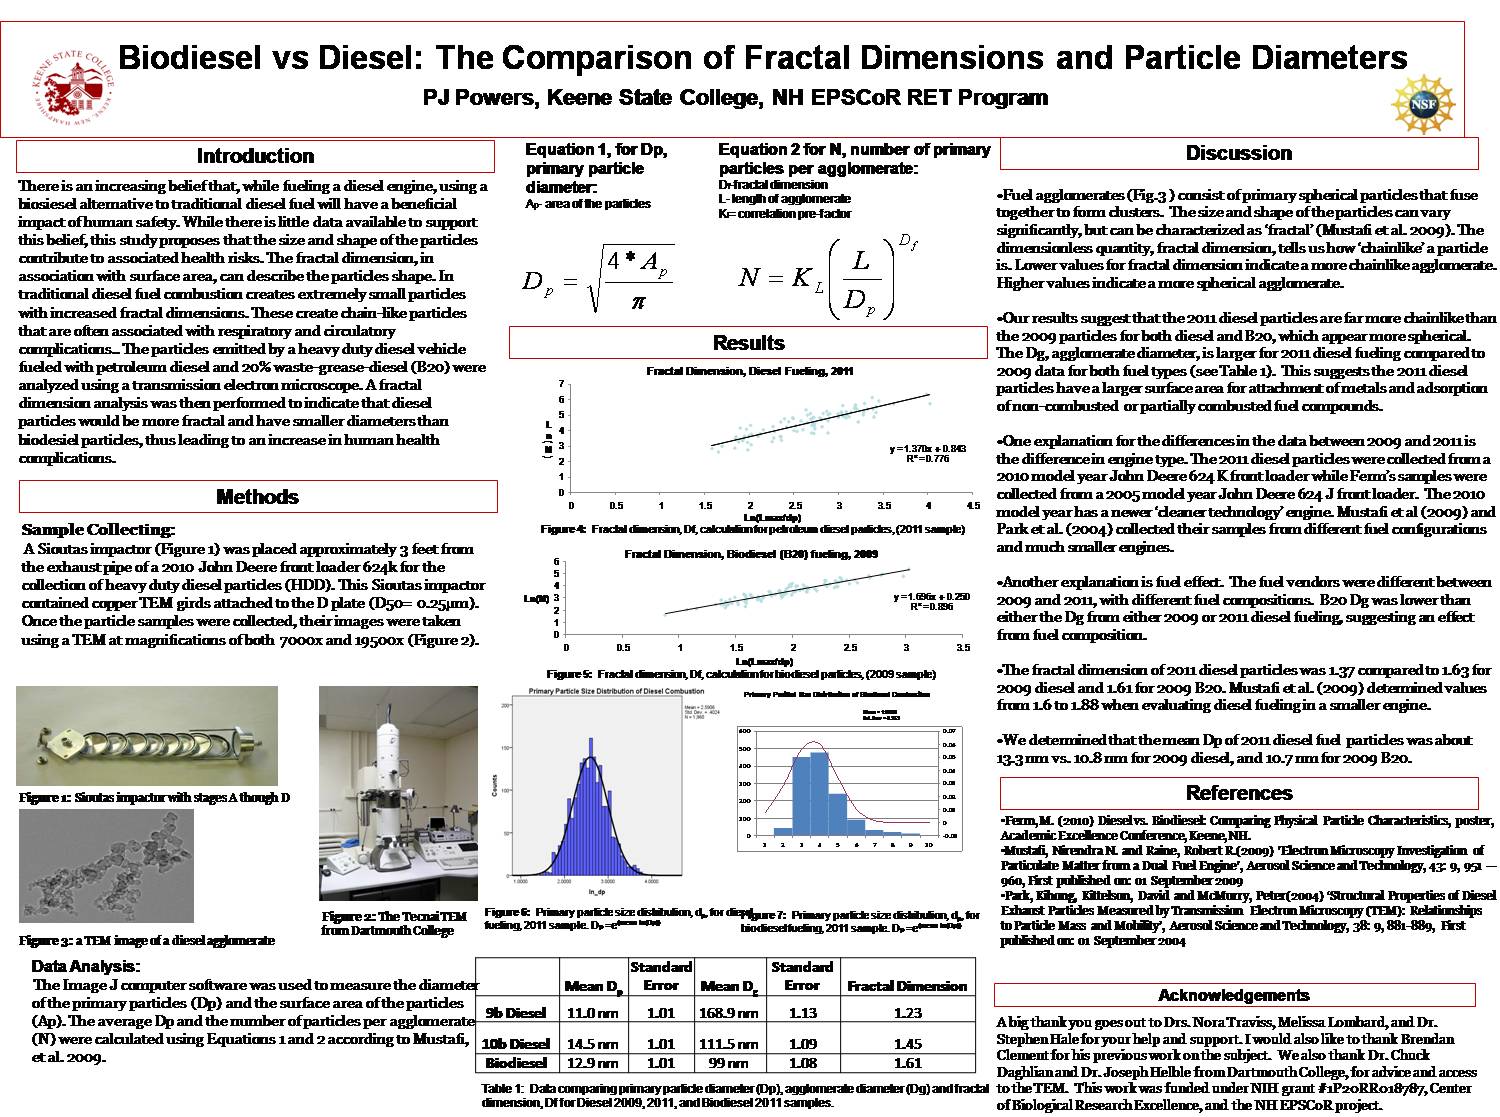 Biodiesel Vs Diesel: The Comparison Of Fractal Dimensions And Particle Diameters by srhale